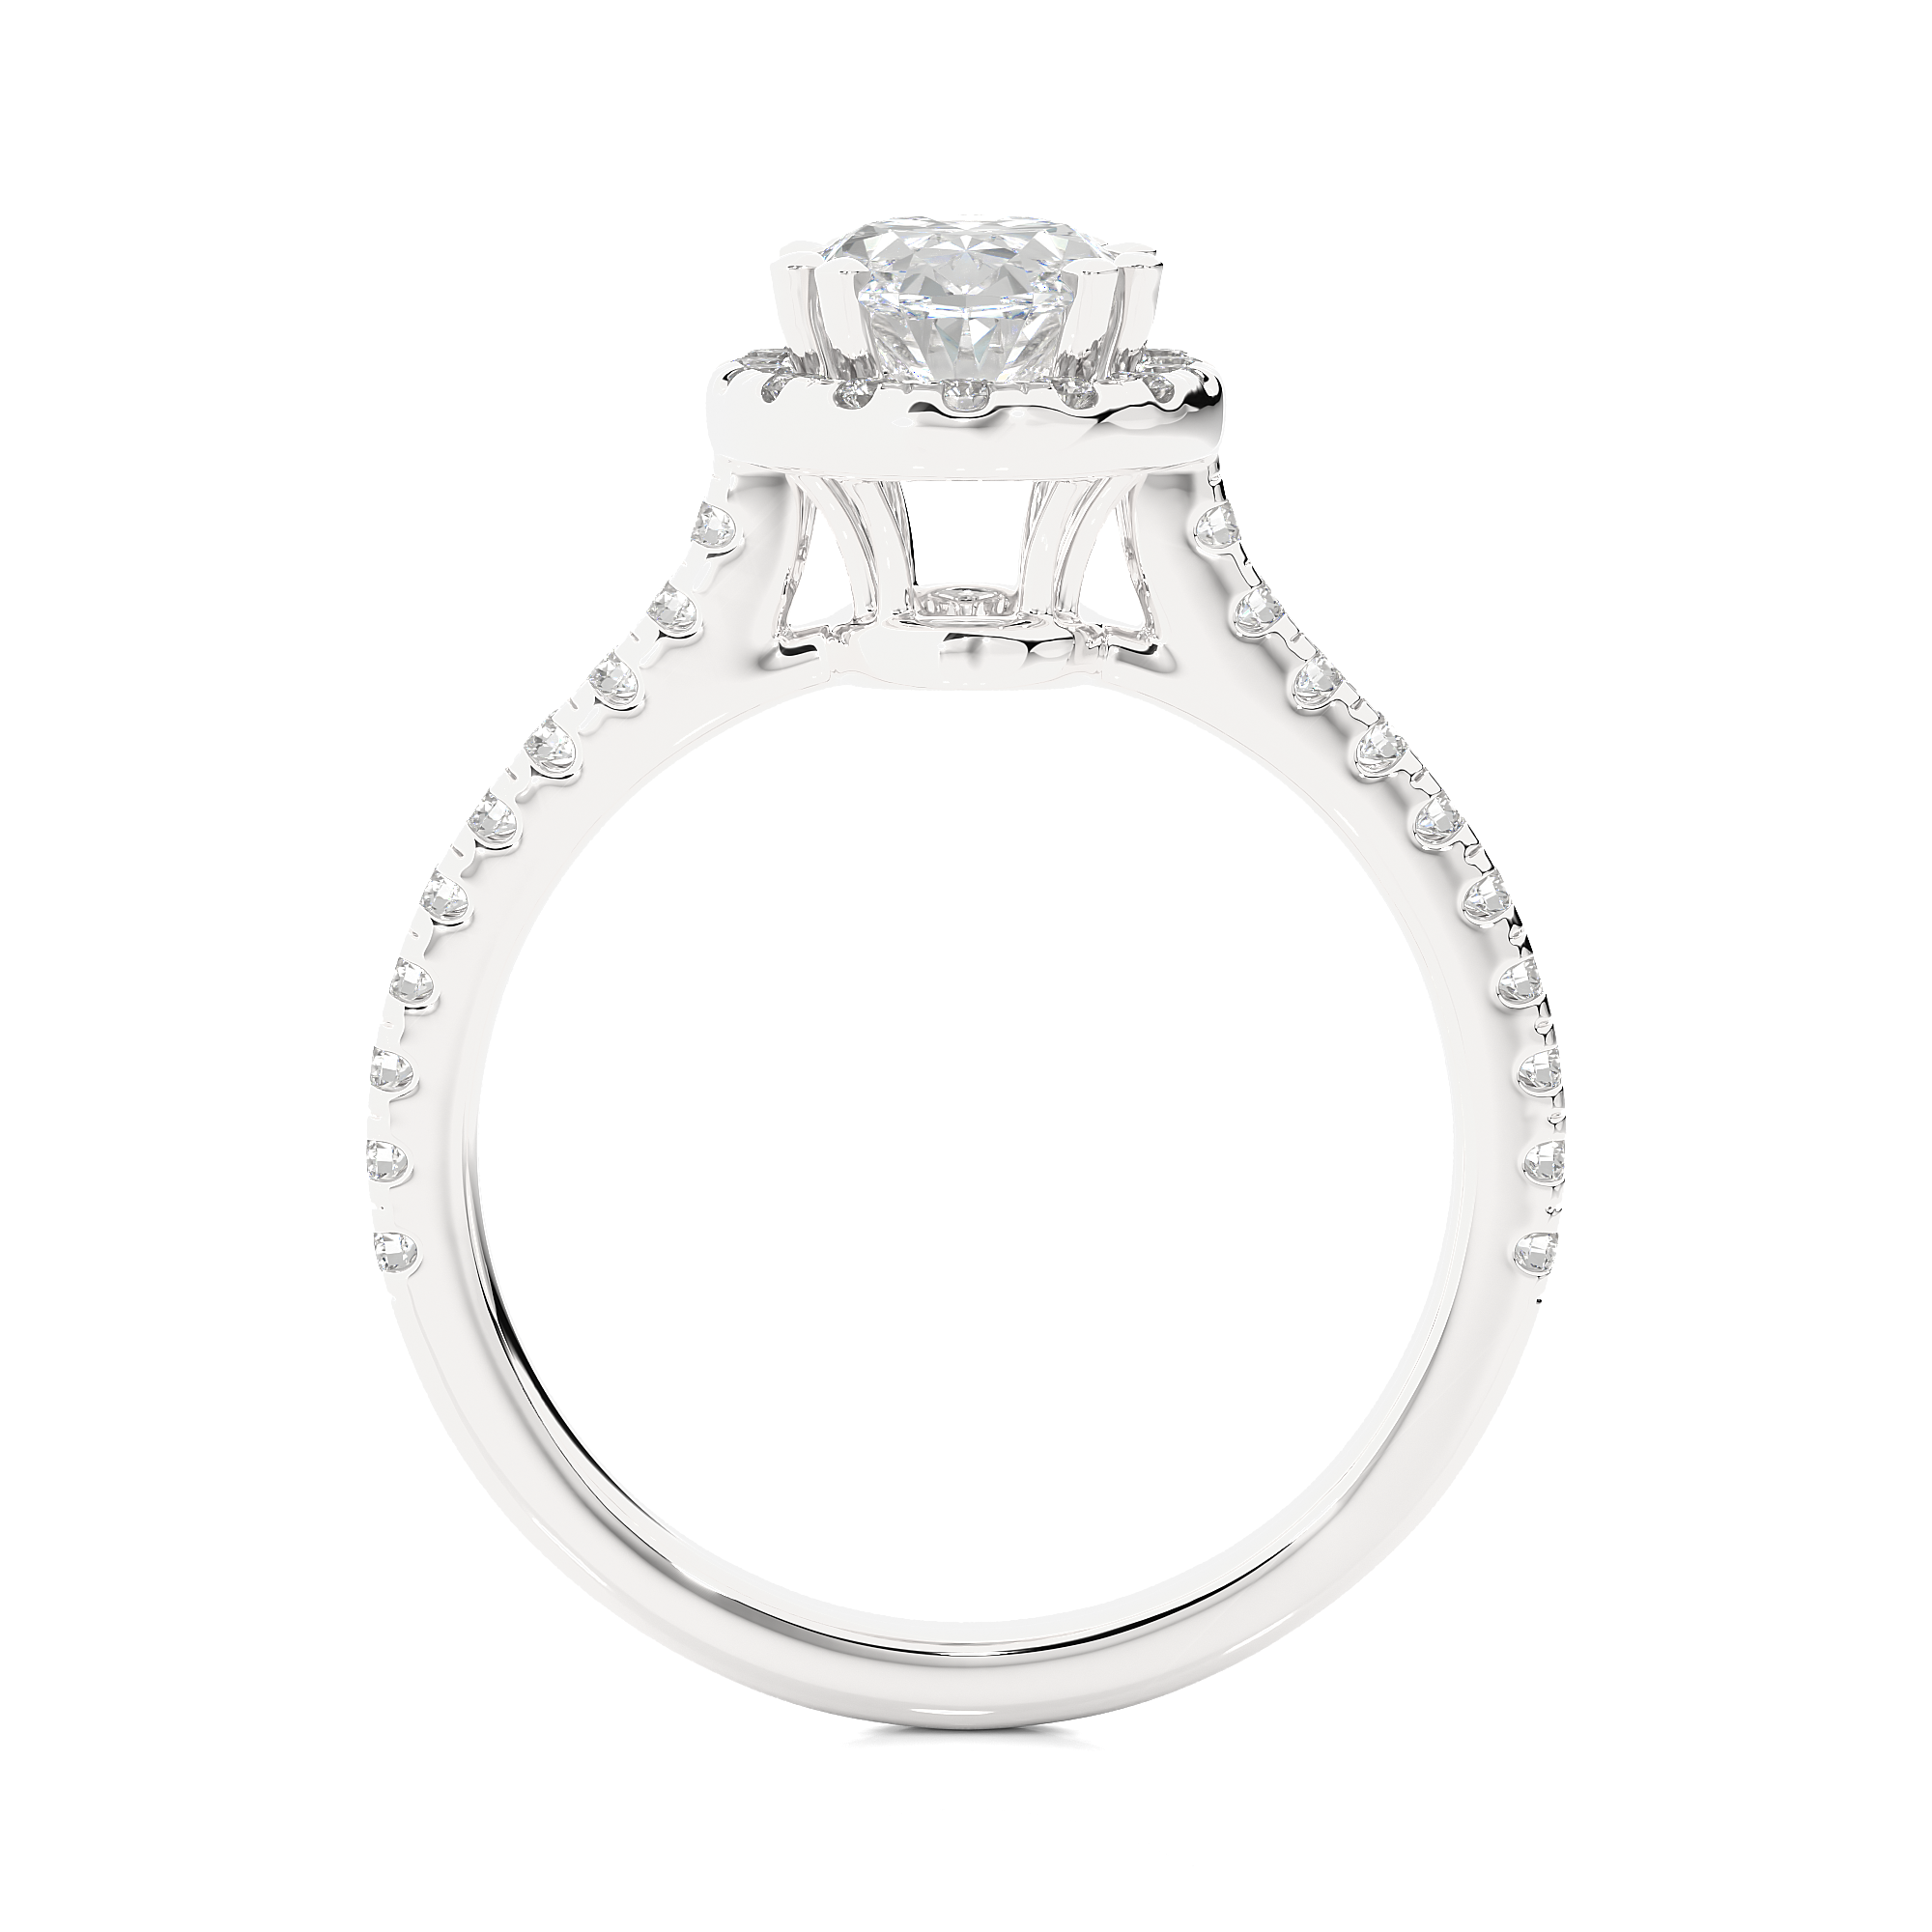 1.49Ct Oval Shaped Solitaire Diamond Ring in White Gold - Blu Diamonds